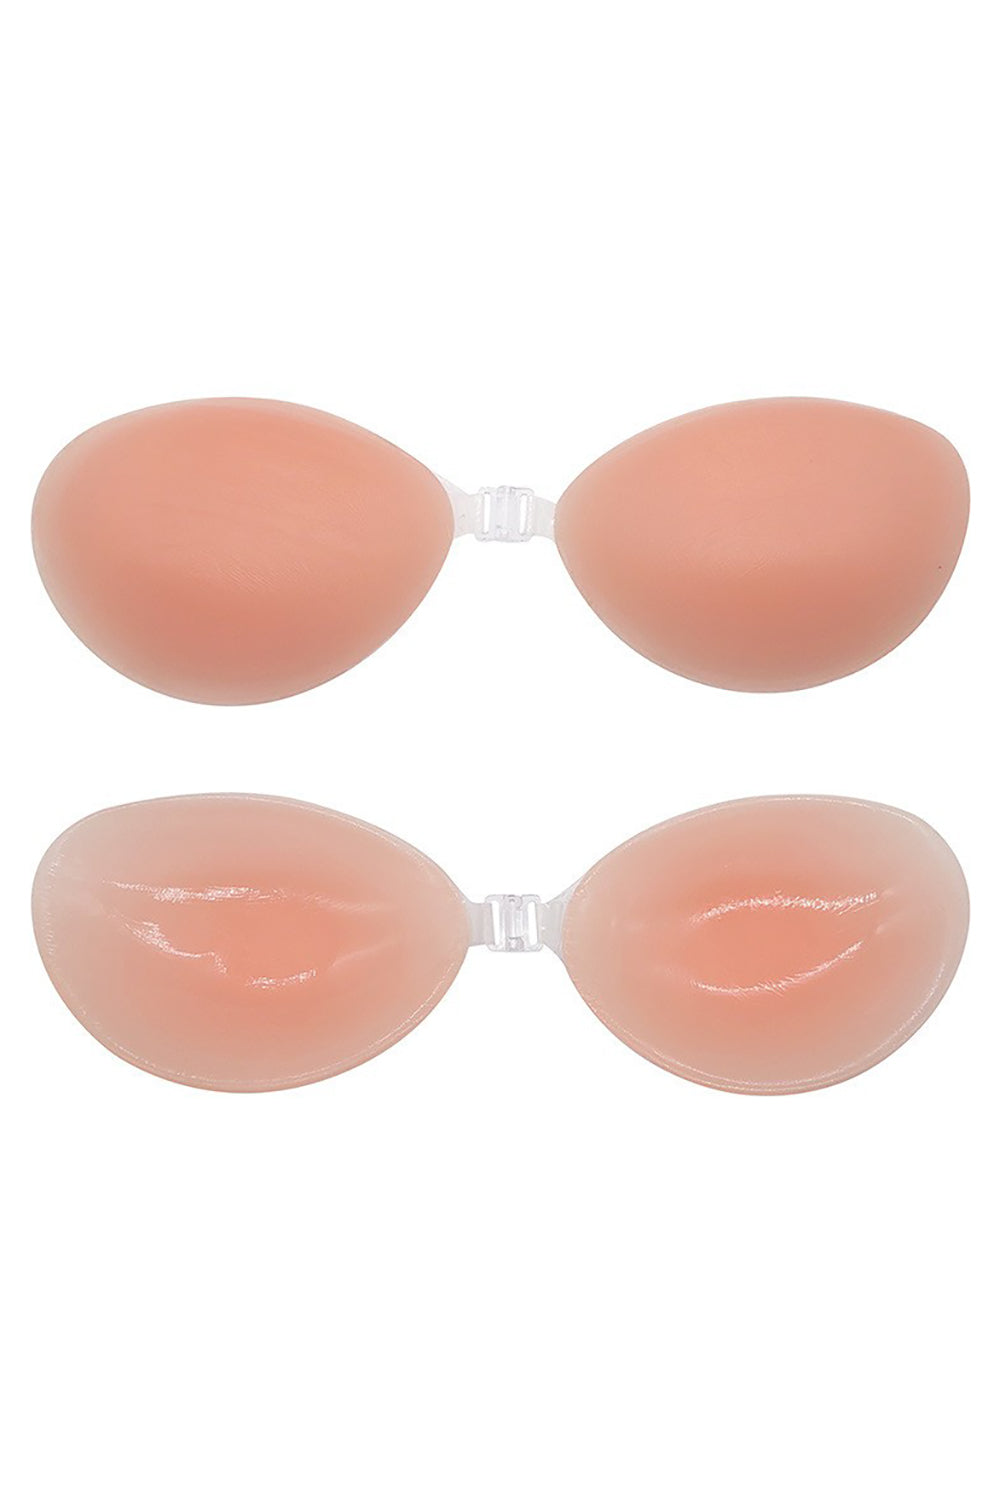 Anti-Slip Sticky Bras Adhesive Silicone Push Up Deep V Invisible Bra  Backless Strapless Bra for Women Nipple Covers (Color : Natural, Size : A)